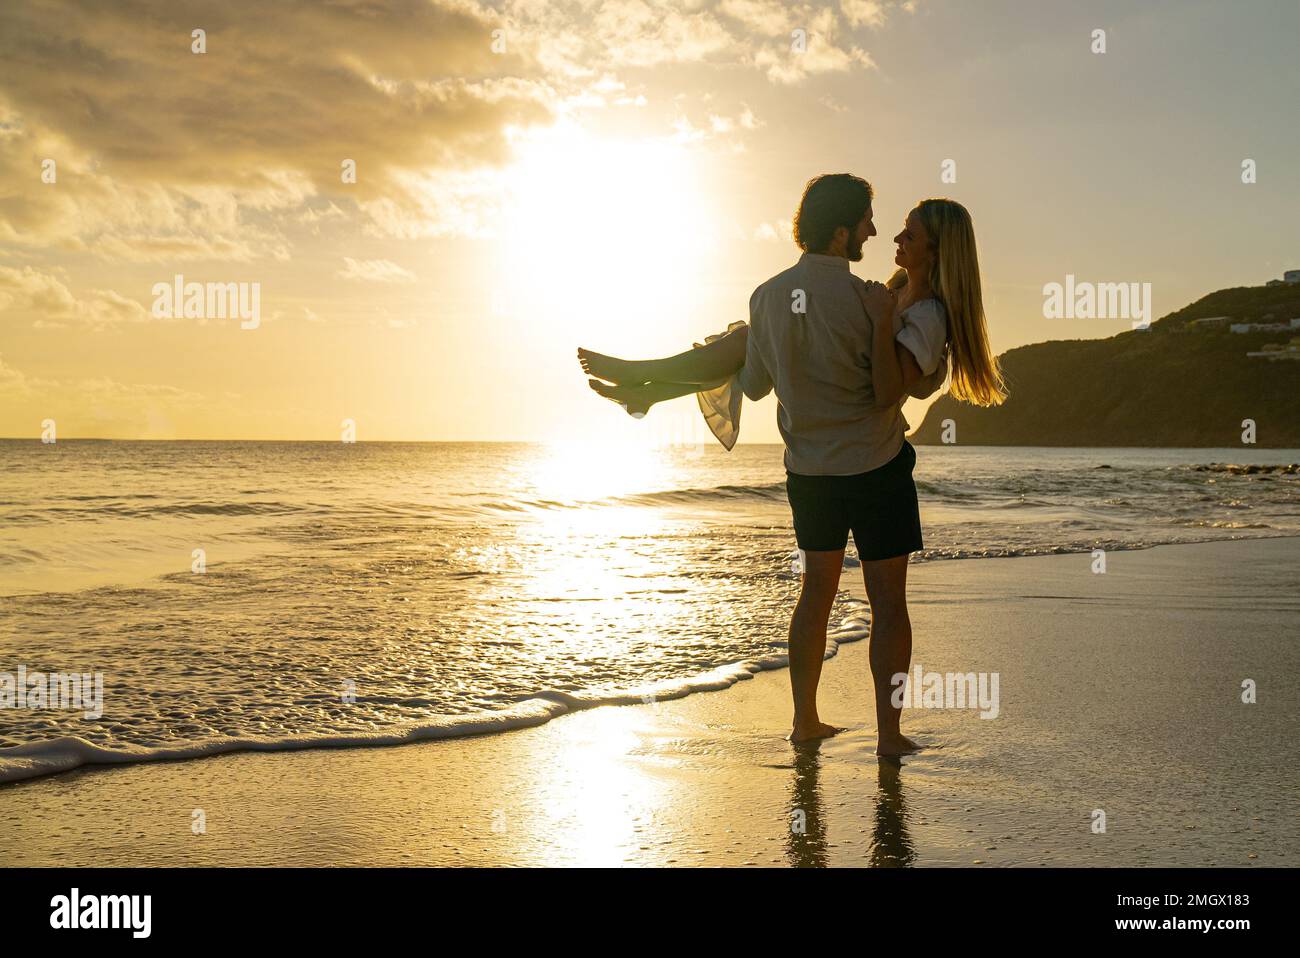 Young man holding up woman on the beach during sunset as they look into each other's eyes Stock Photo